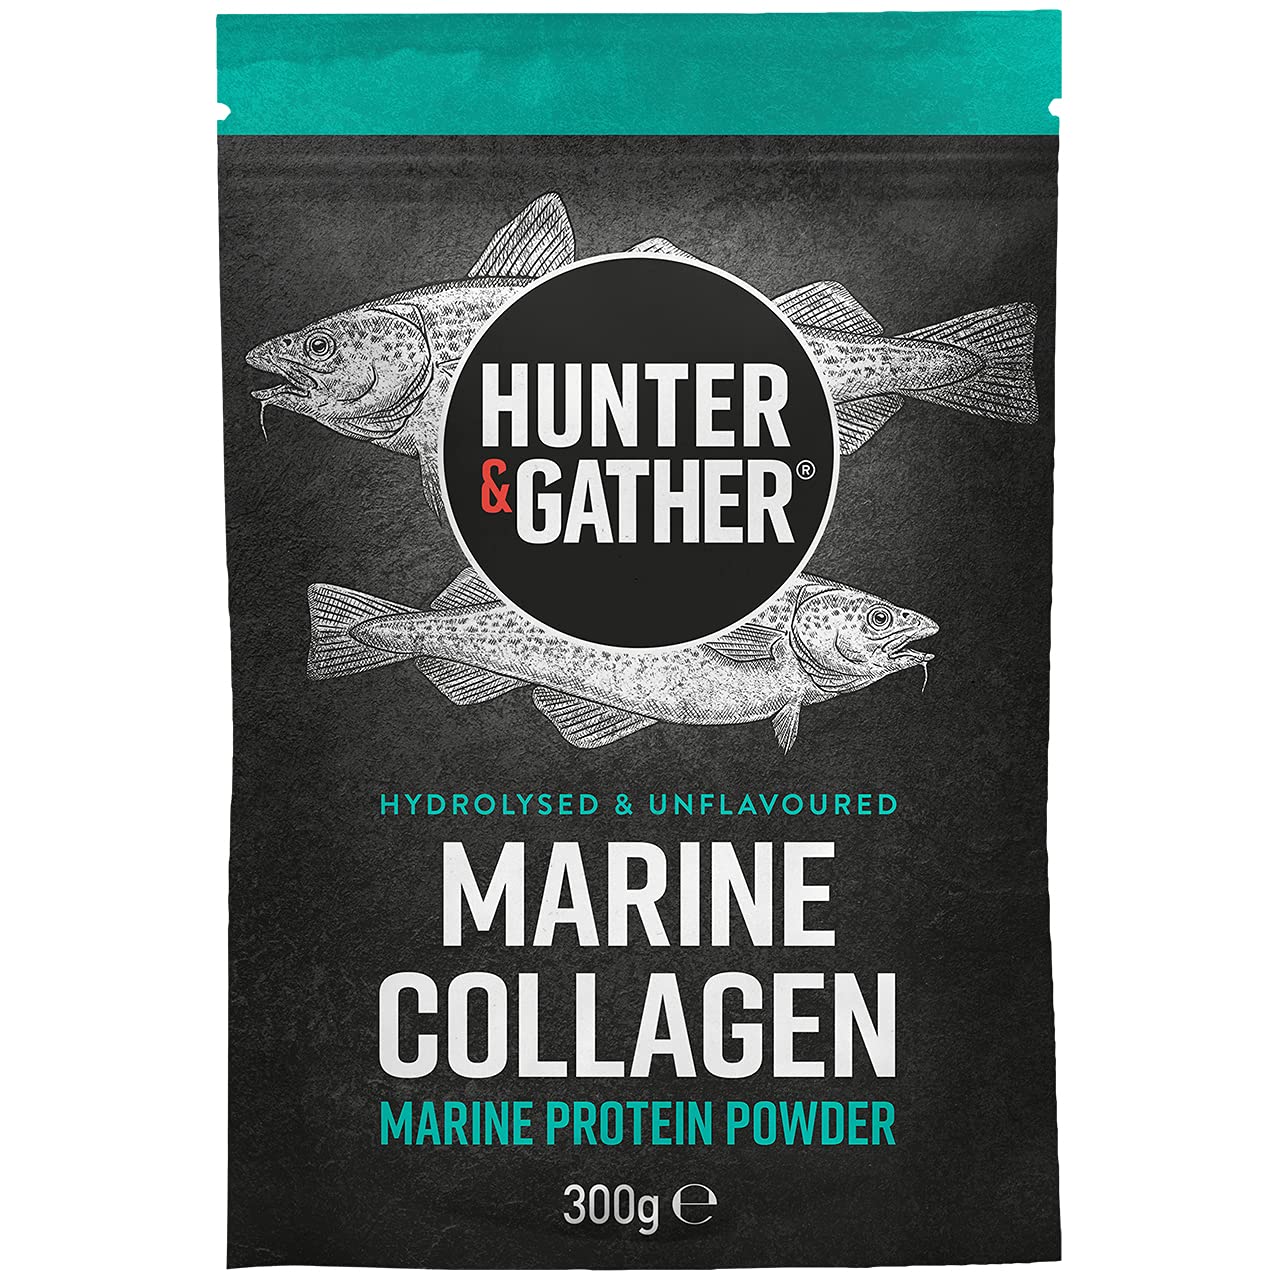 Collagen Powder - Wild Caught Hydrolysed Marine Collagen Peptides Powder for Hair Skin Nails Muscles (Plastic Free Packaging) - 300g… (300 Grams)